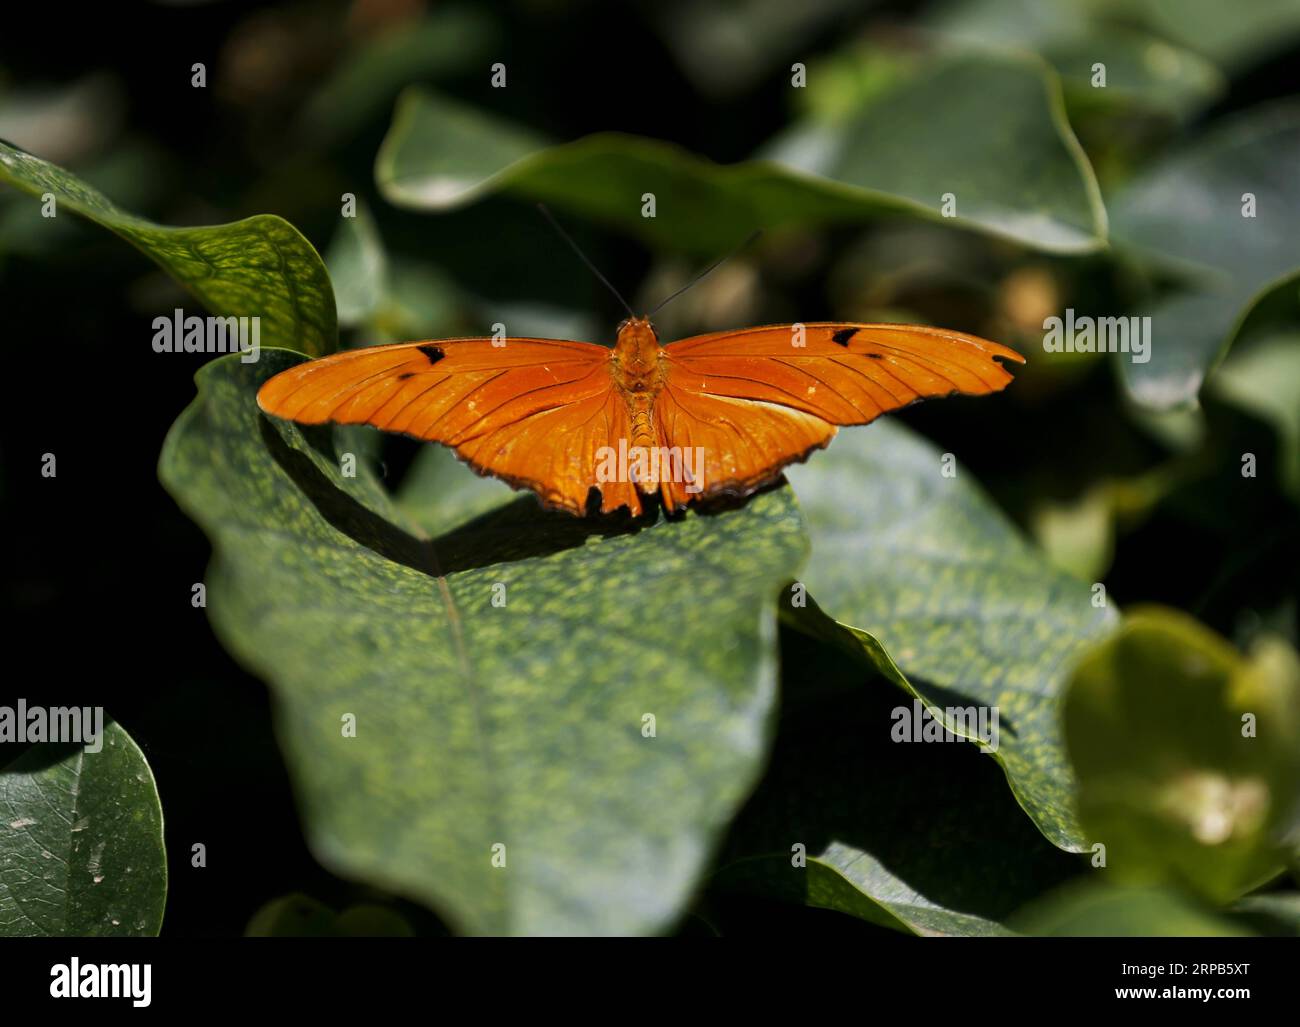 (190528) -- LOS ANGELES, May 28, 2019 (Xinhua) -- A butterfly is seen on leaves at the Butterfly Pavilion of the Natural History Museum of Los Angeles County in Los Angeles, the United States, May 27, 2019. The butterfly exhibition at the Natural History Museum of Los Angeles County showcases hundreds of butterflies and the plants that surround them. (Xinhua/Li Ying) U.S.-LOS ANGELES-BUTTERFLY EXHIBITION PUBLICATIONxNOTxINxCHN Stock Photo